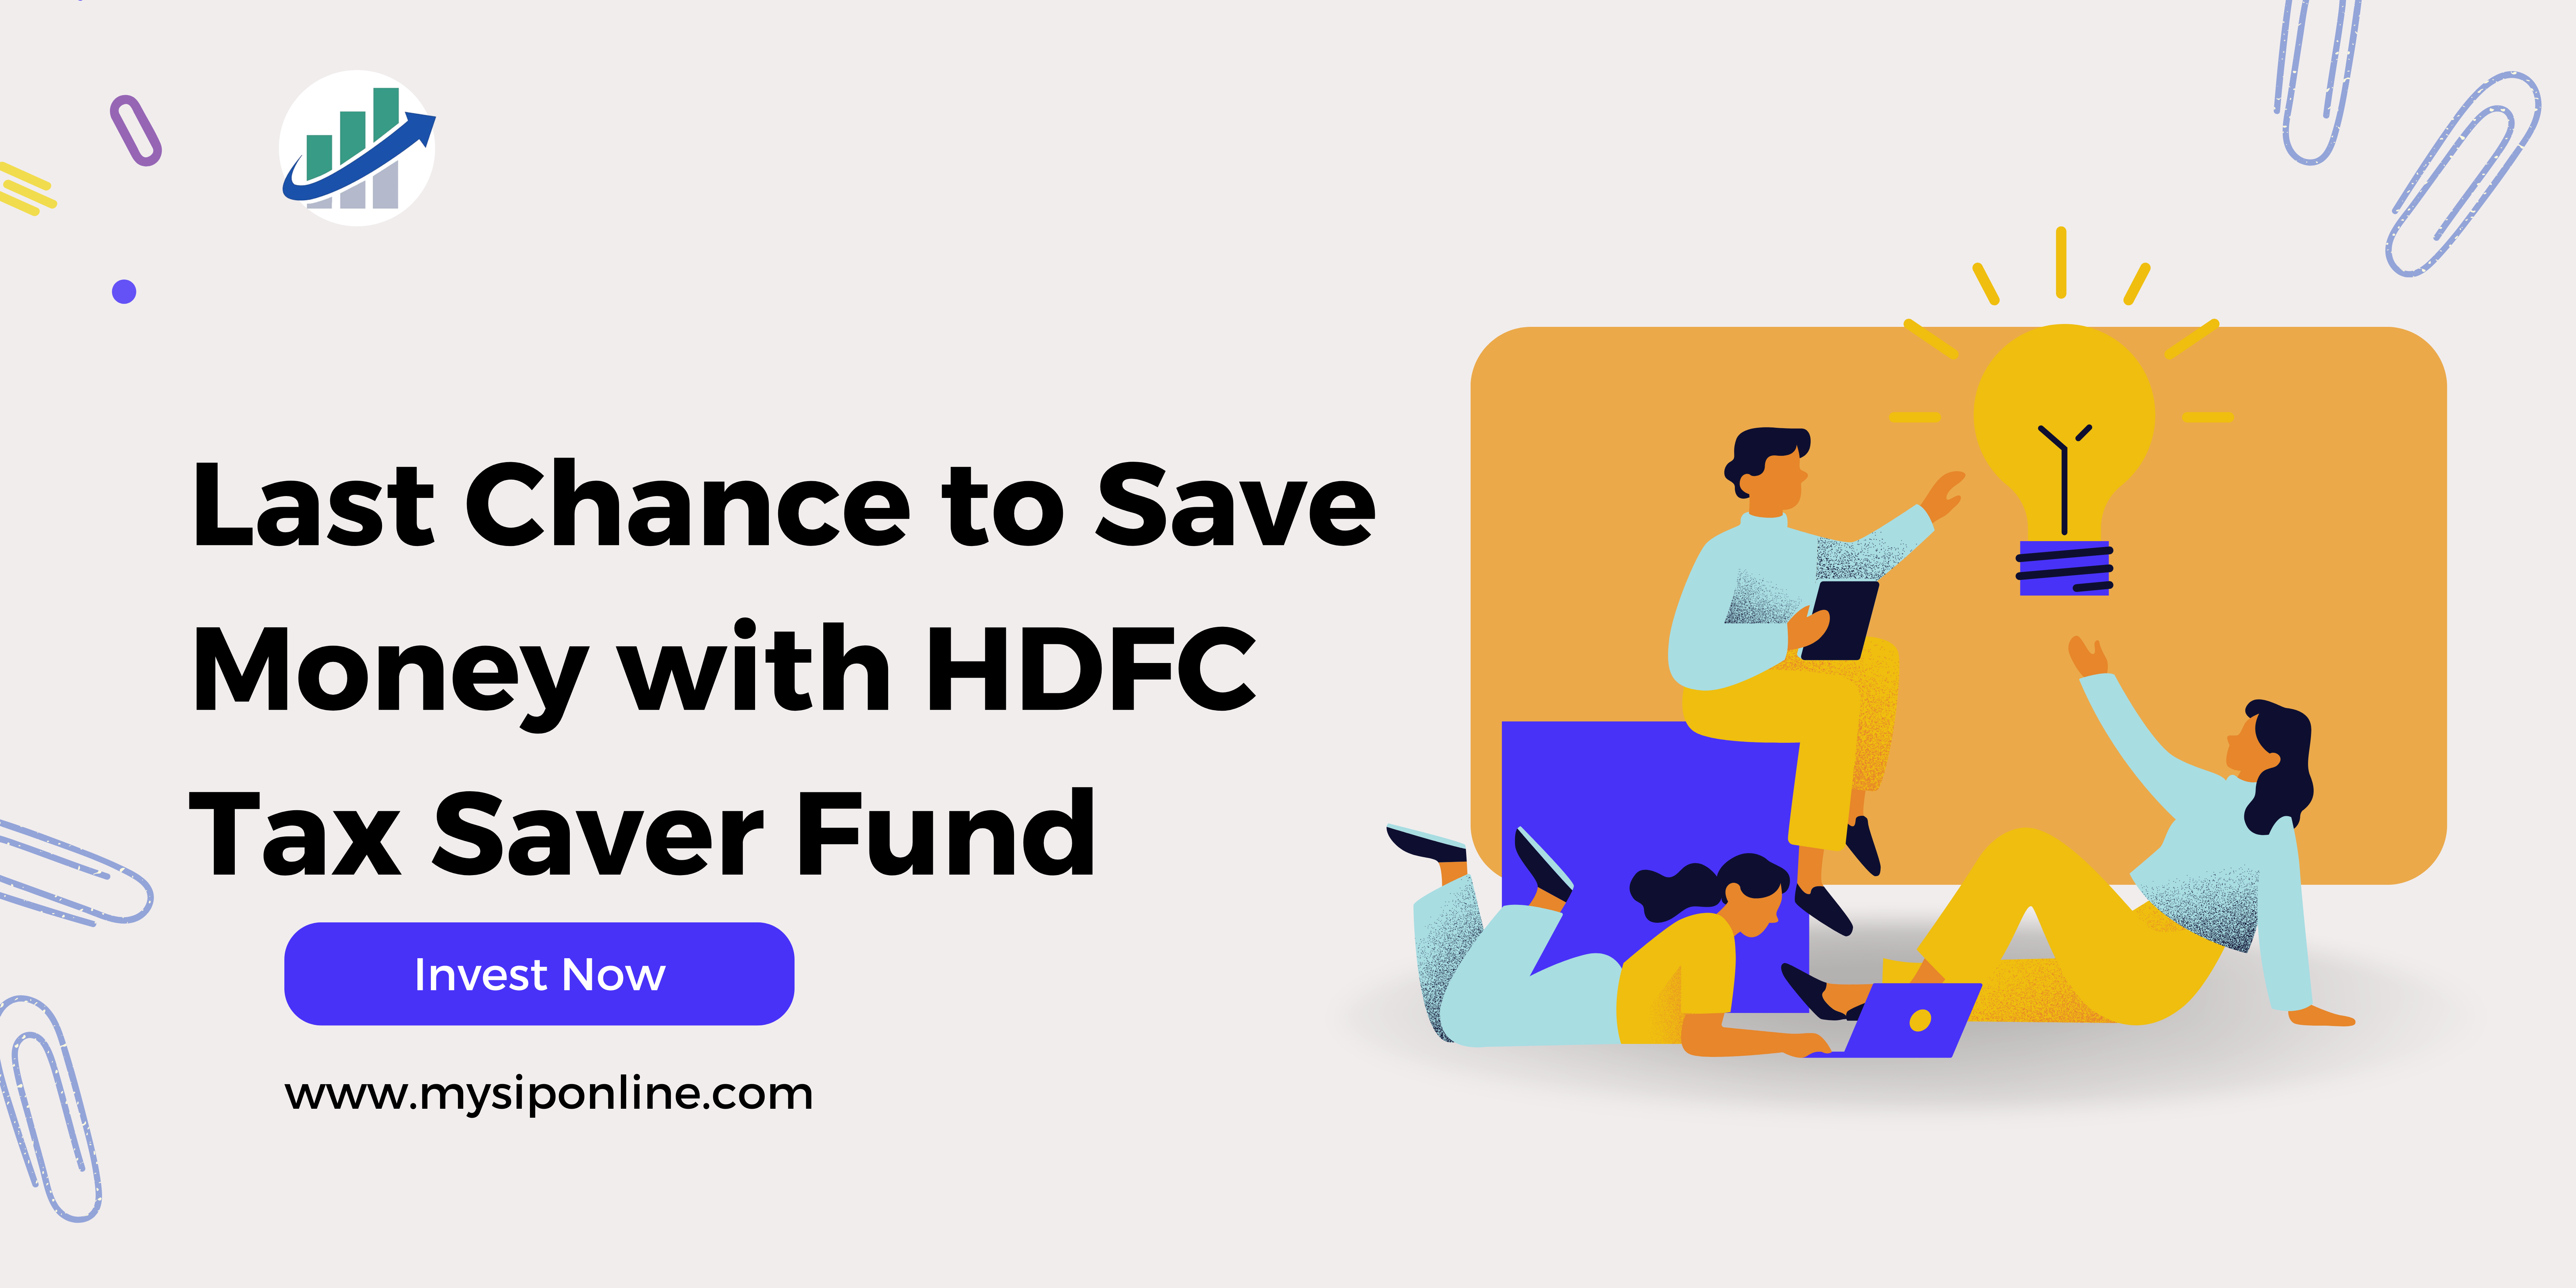 Last Chance to Save Money with HDFC Tax Saver Fund